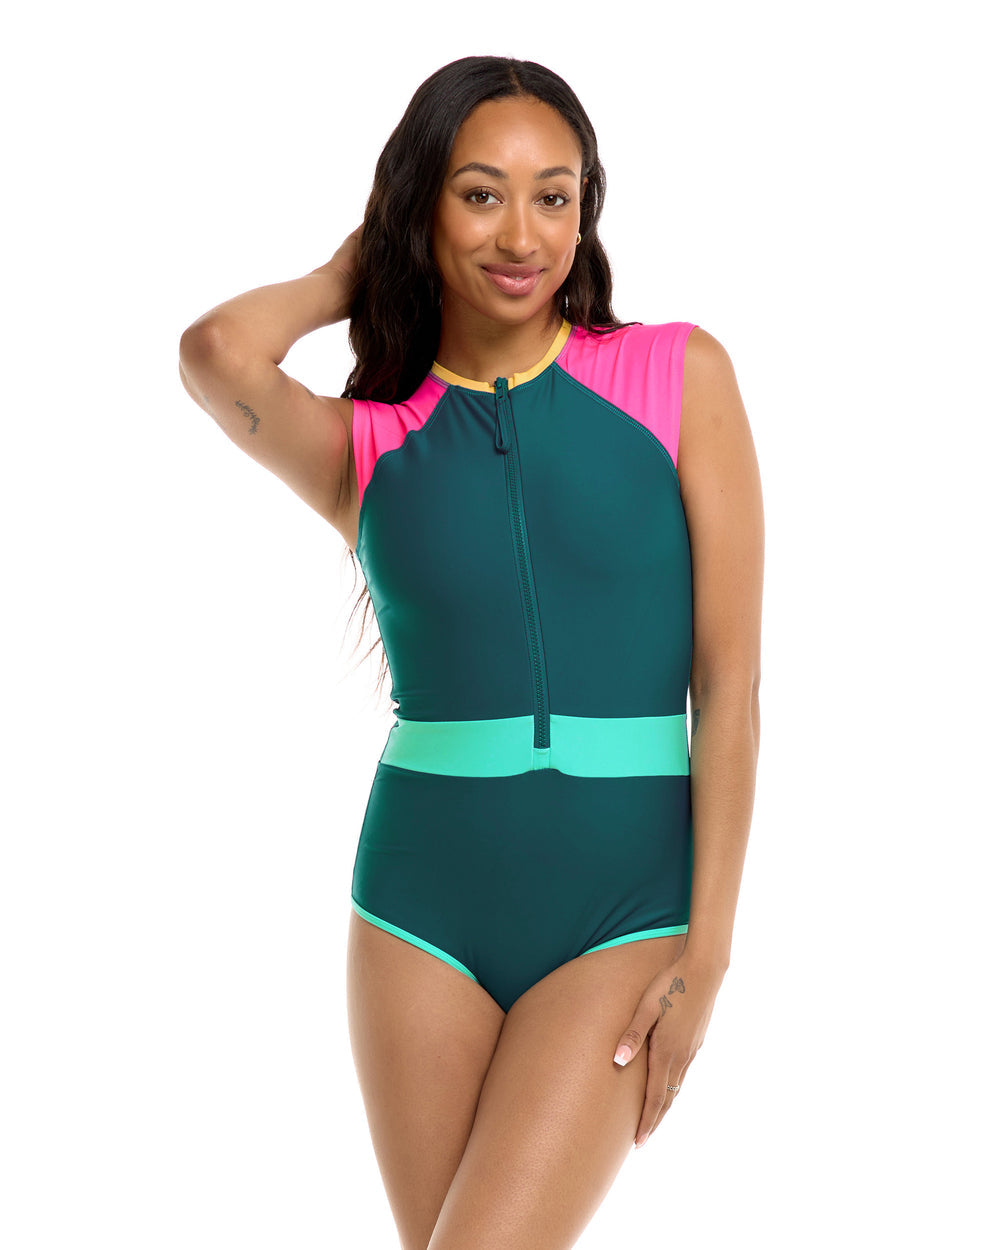 Vibration Stand Up One-Piece Swimsuit - Kingfisher - Sun Diego Boardshop